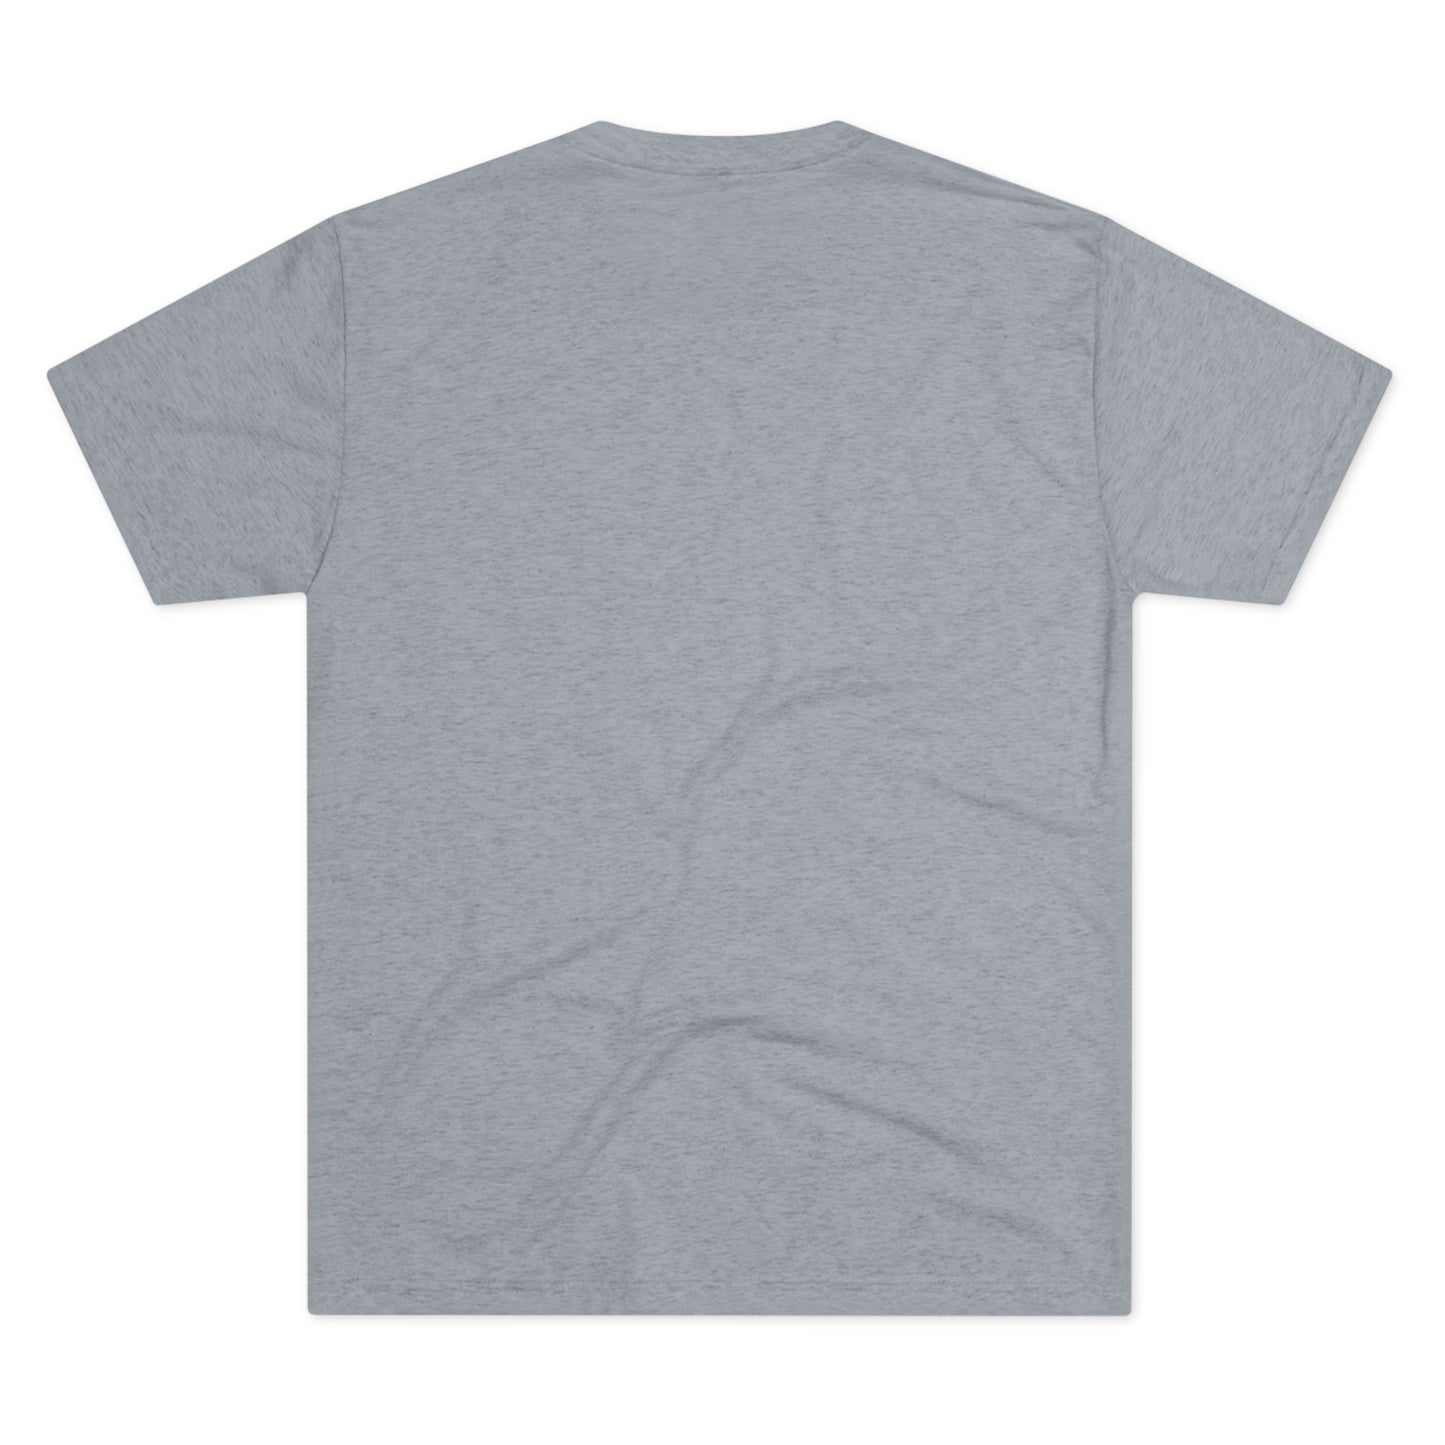 Baseball Bliss Tri-Blend Tee: Unbelievably Soft Comfort with a Stylish Edge - Perfect for Baseball Enthusiasts!